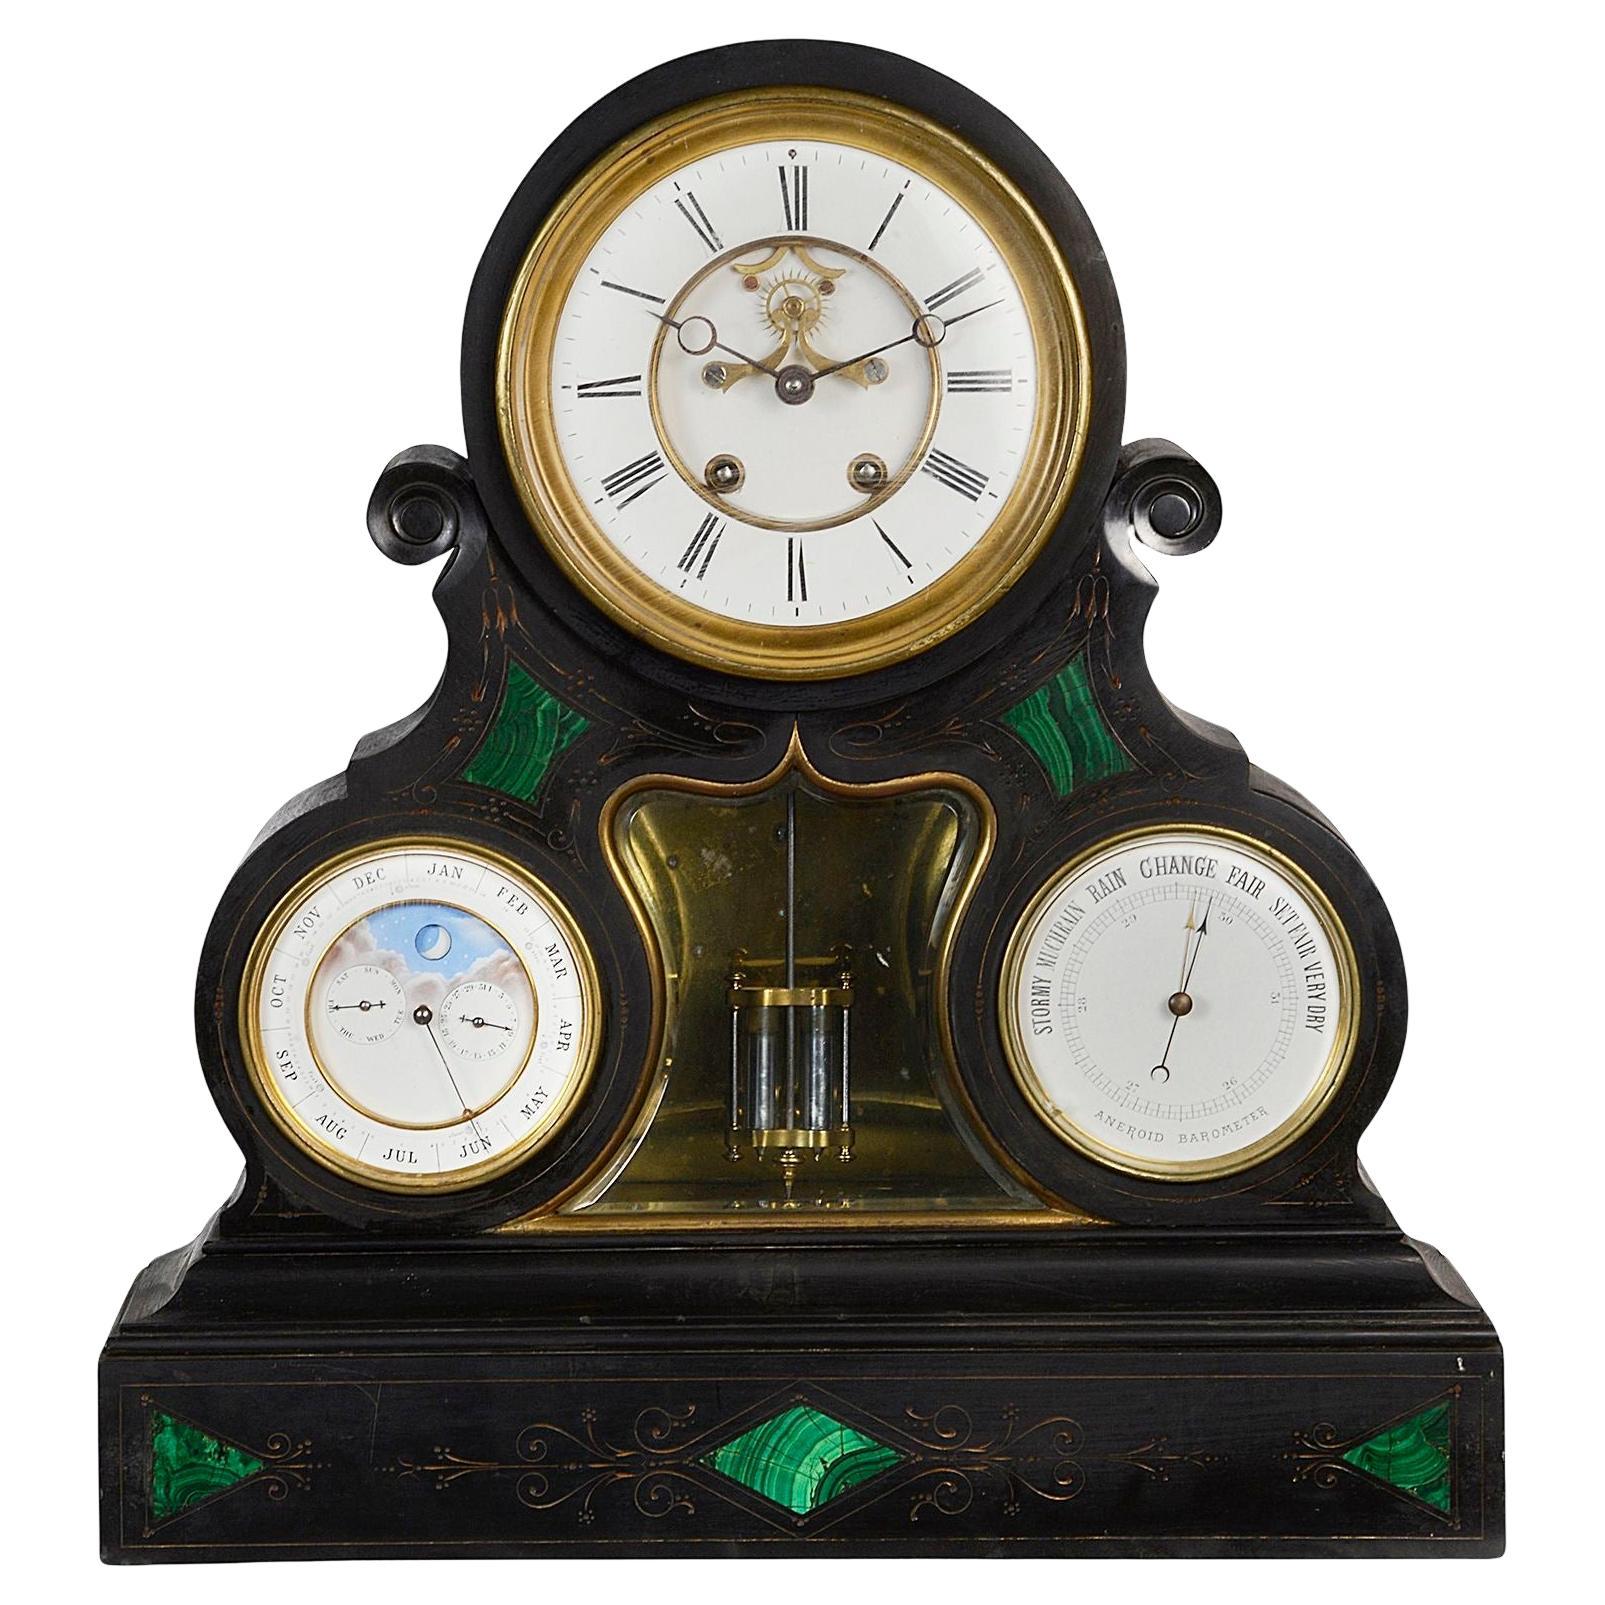 Late 19th Century Clock, barometer and calendar with moon phase.